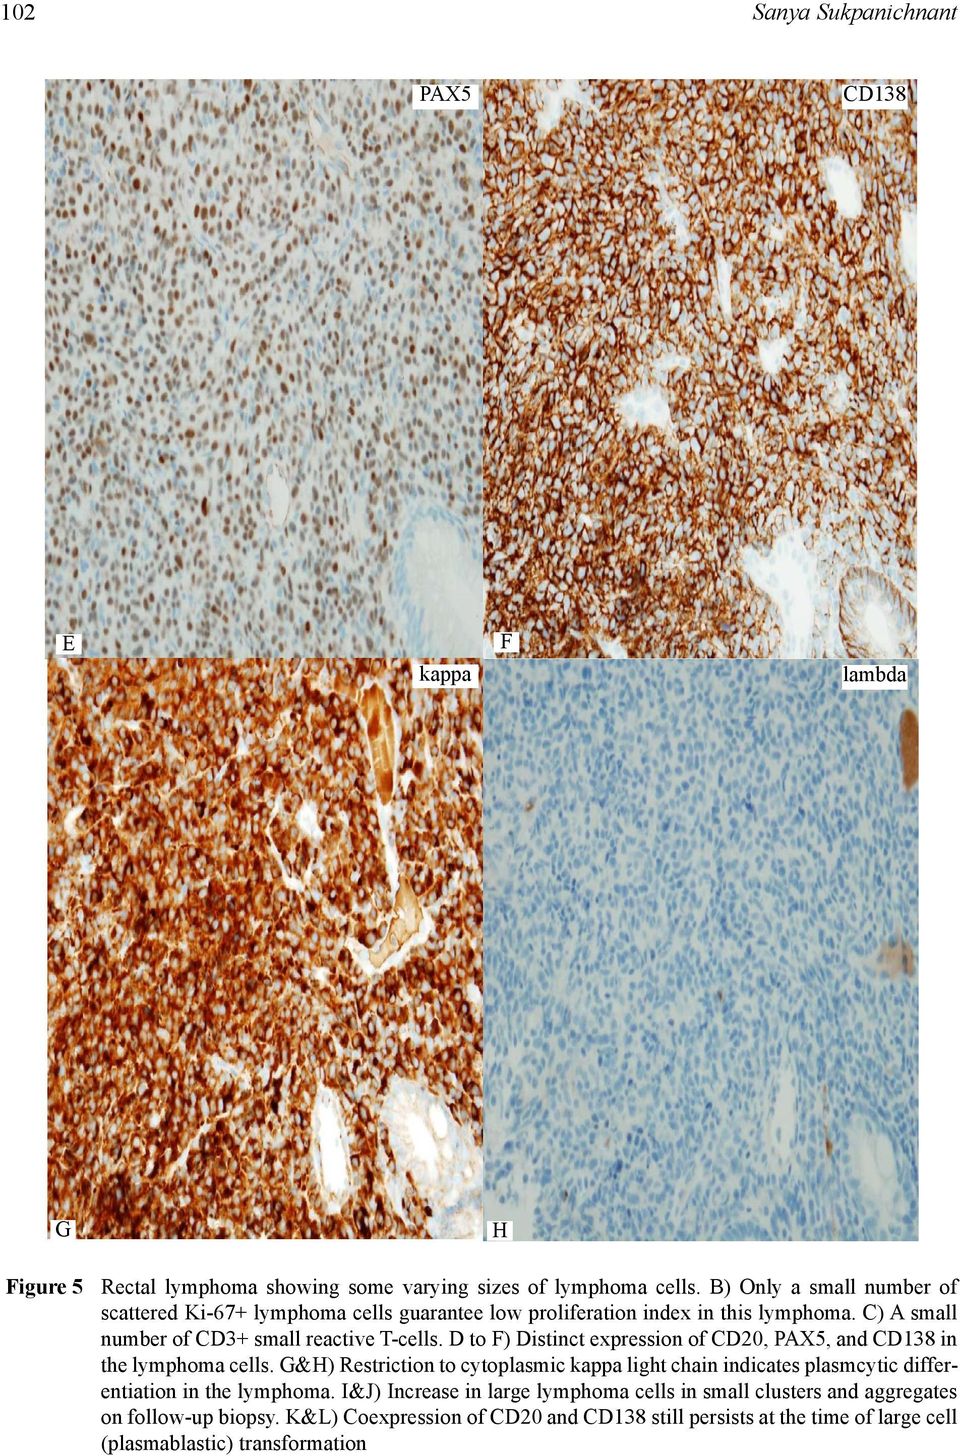 D to F) Distinct expression of CD20, PAX5, and CD138 in the lymphoma cells.